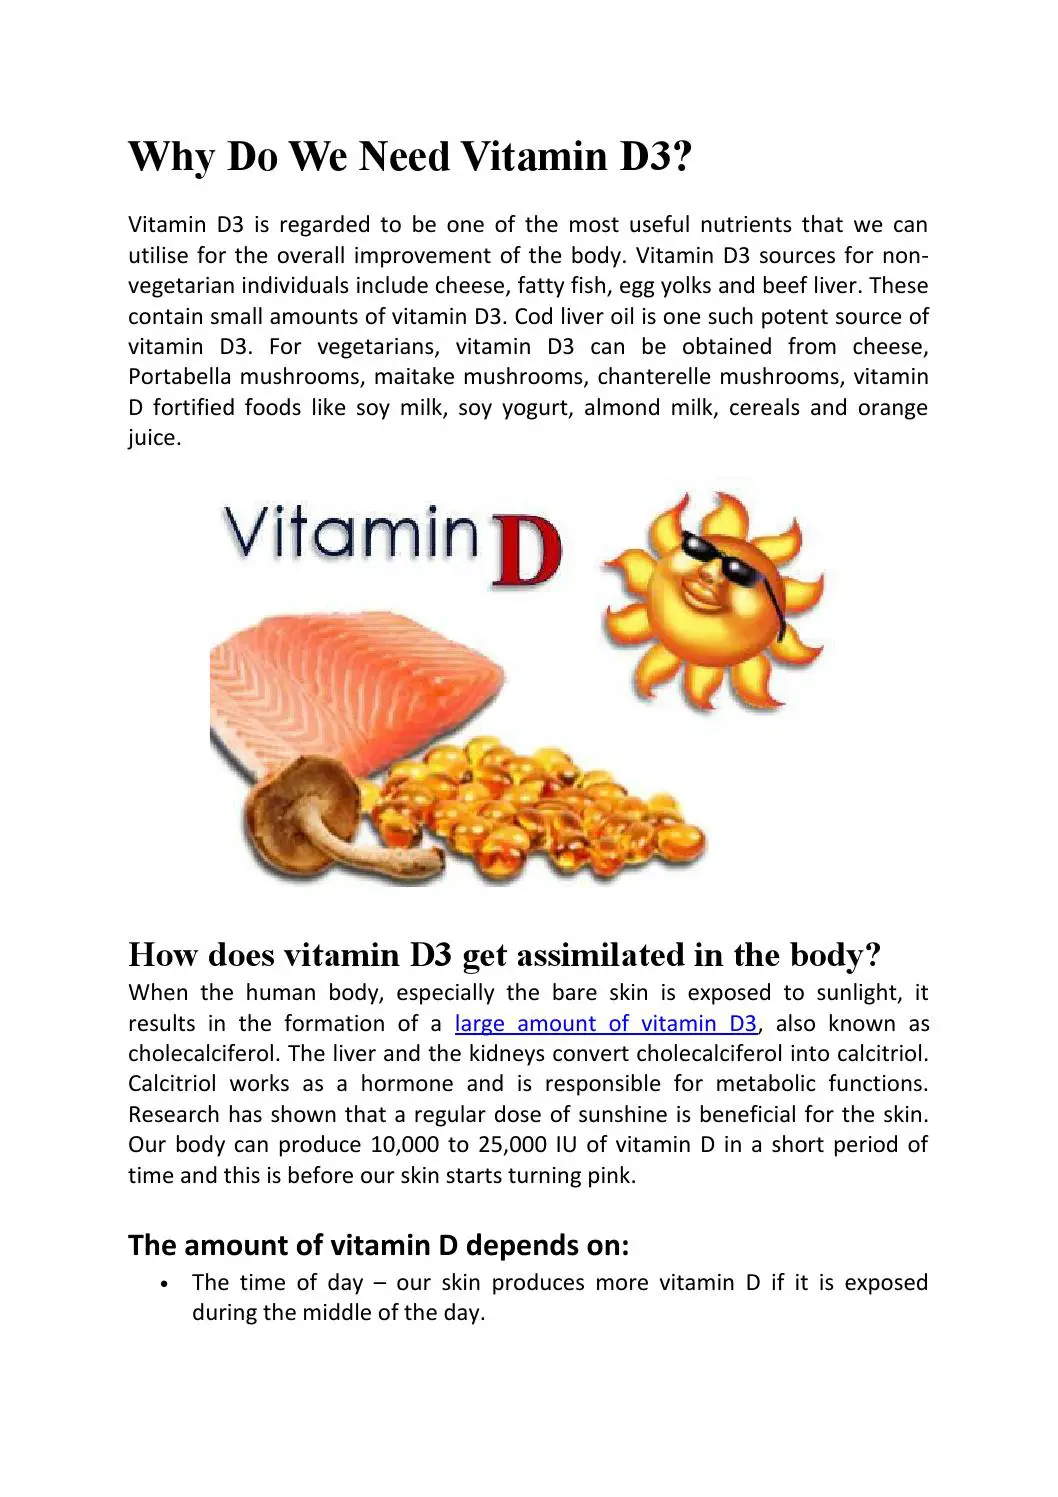 Why do we need vitamin d3 by OTH Health